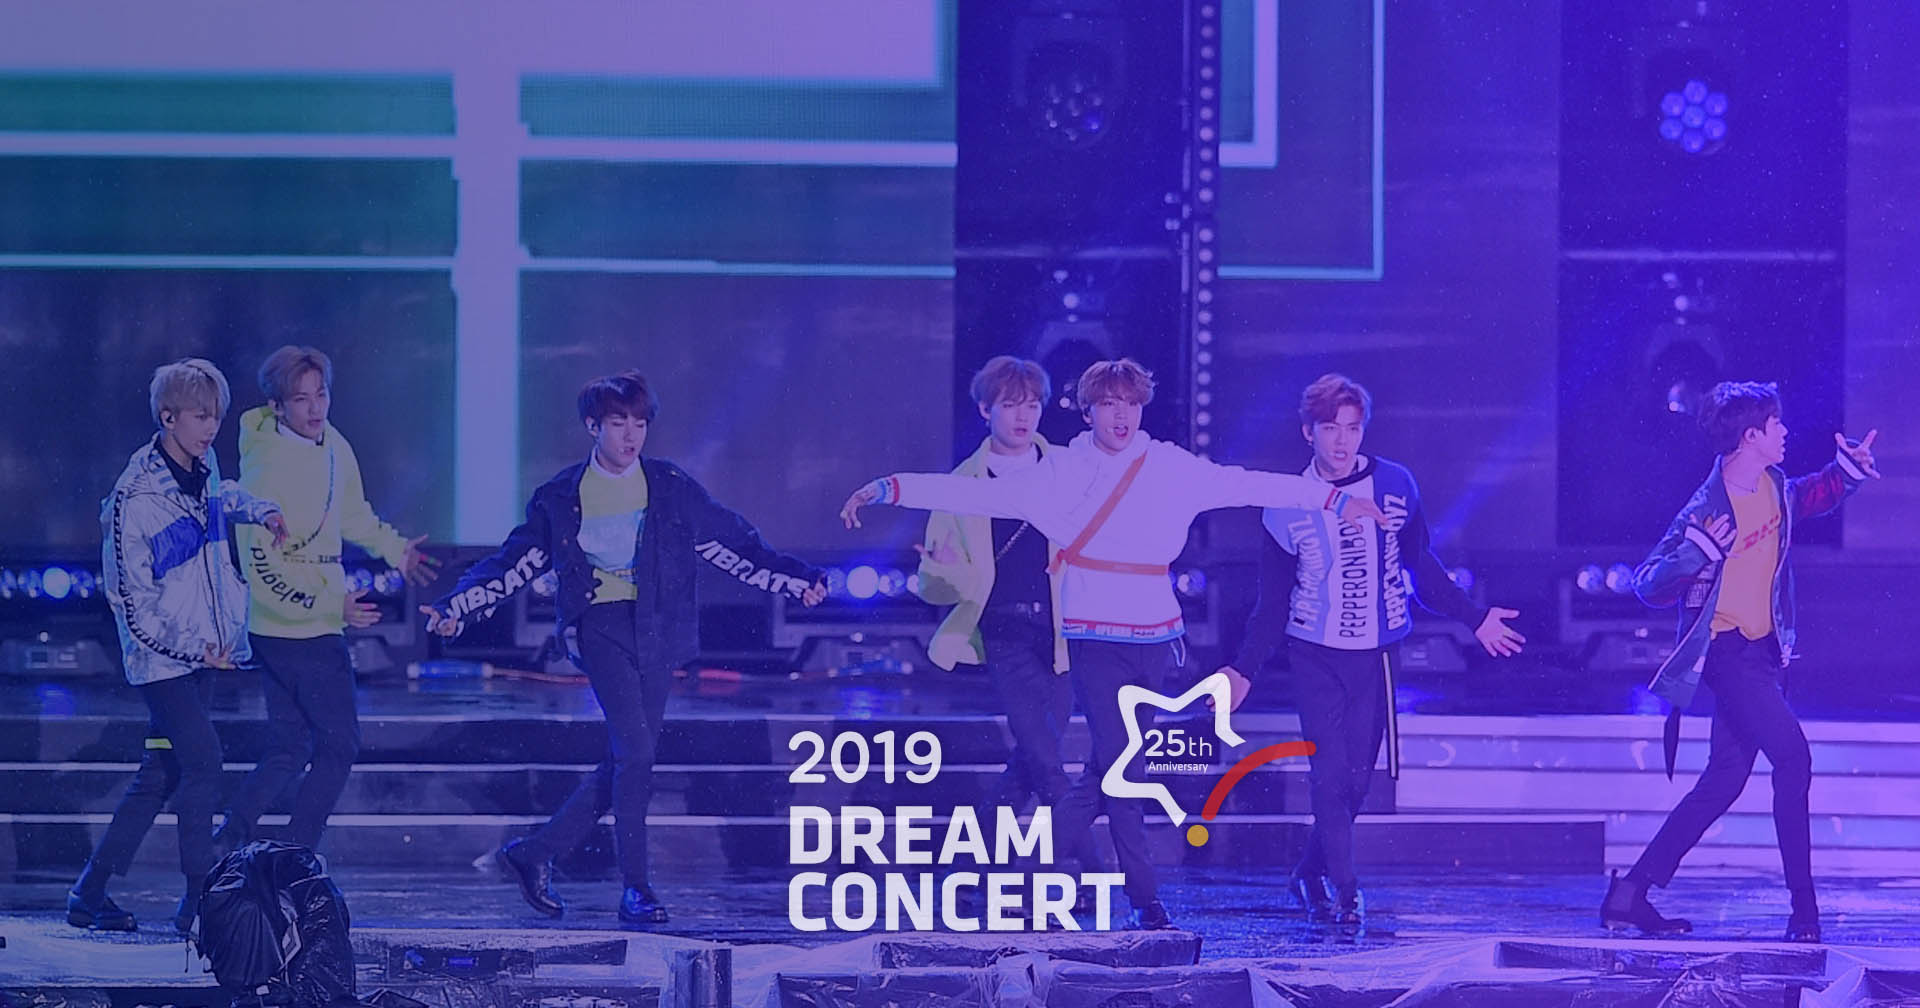 Things you may not know about Dream Concert